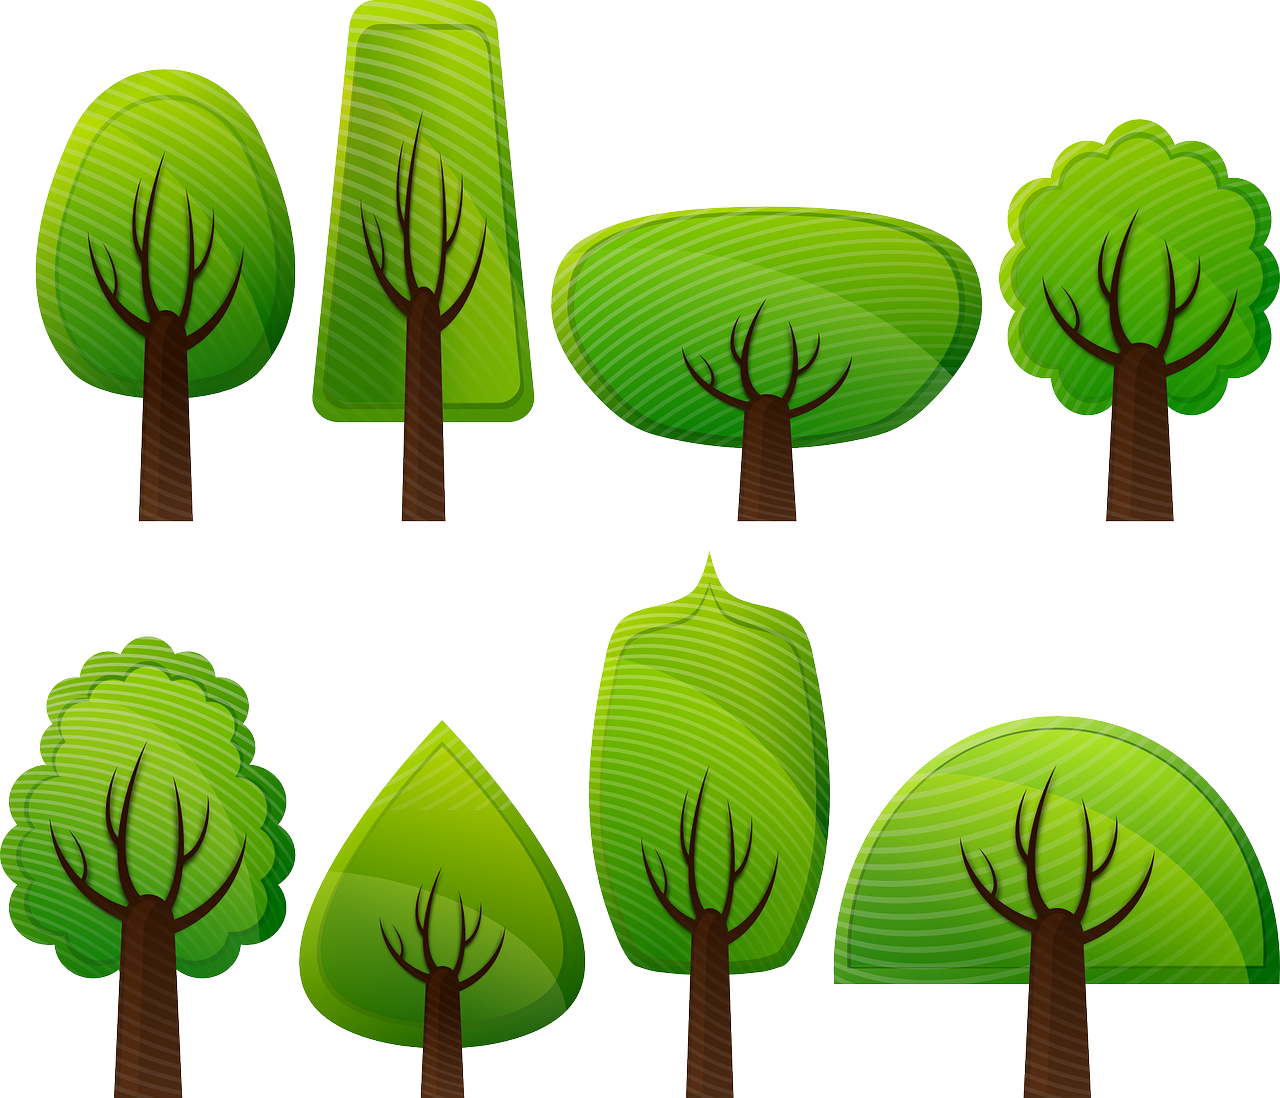 a set of green trees on a white background, an illustration of, naive art, clipart icon, ƒ/8, symmetry illustration, wooden